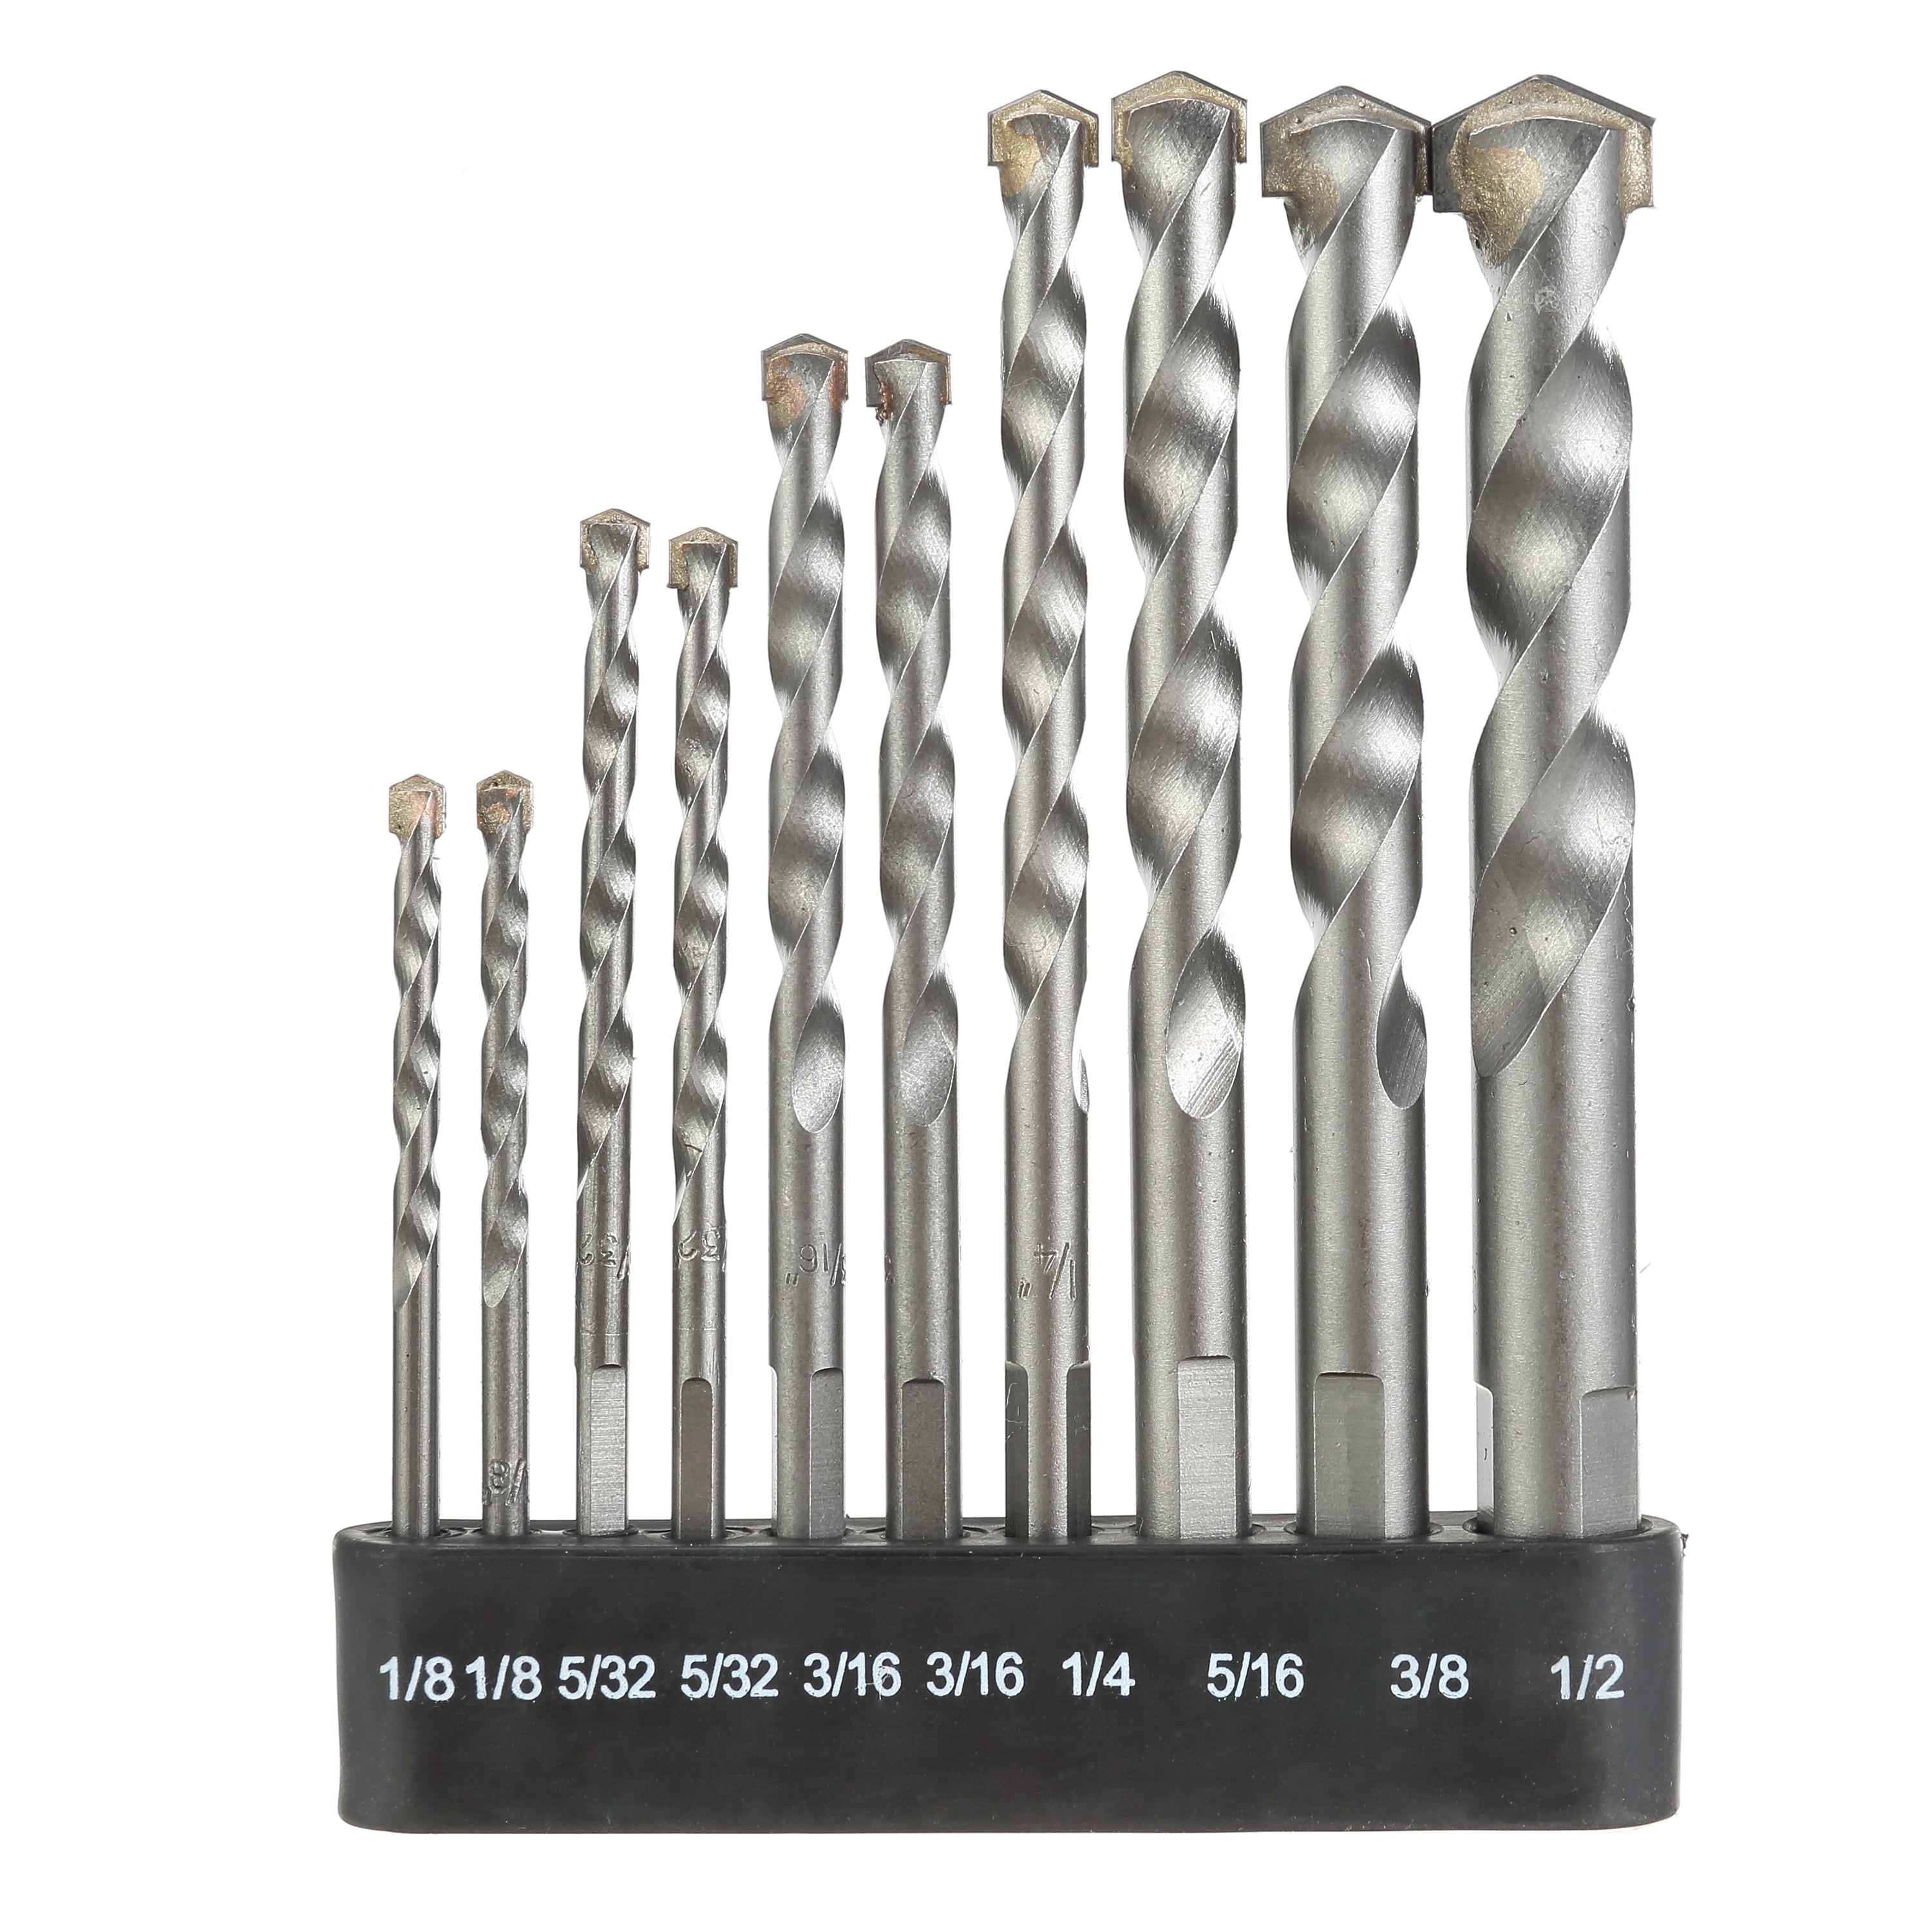 Wood Flat Bit Set Of 10 Pieces For Drilling Holes From 1/4 to 1 1/4 inch